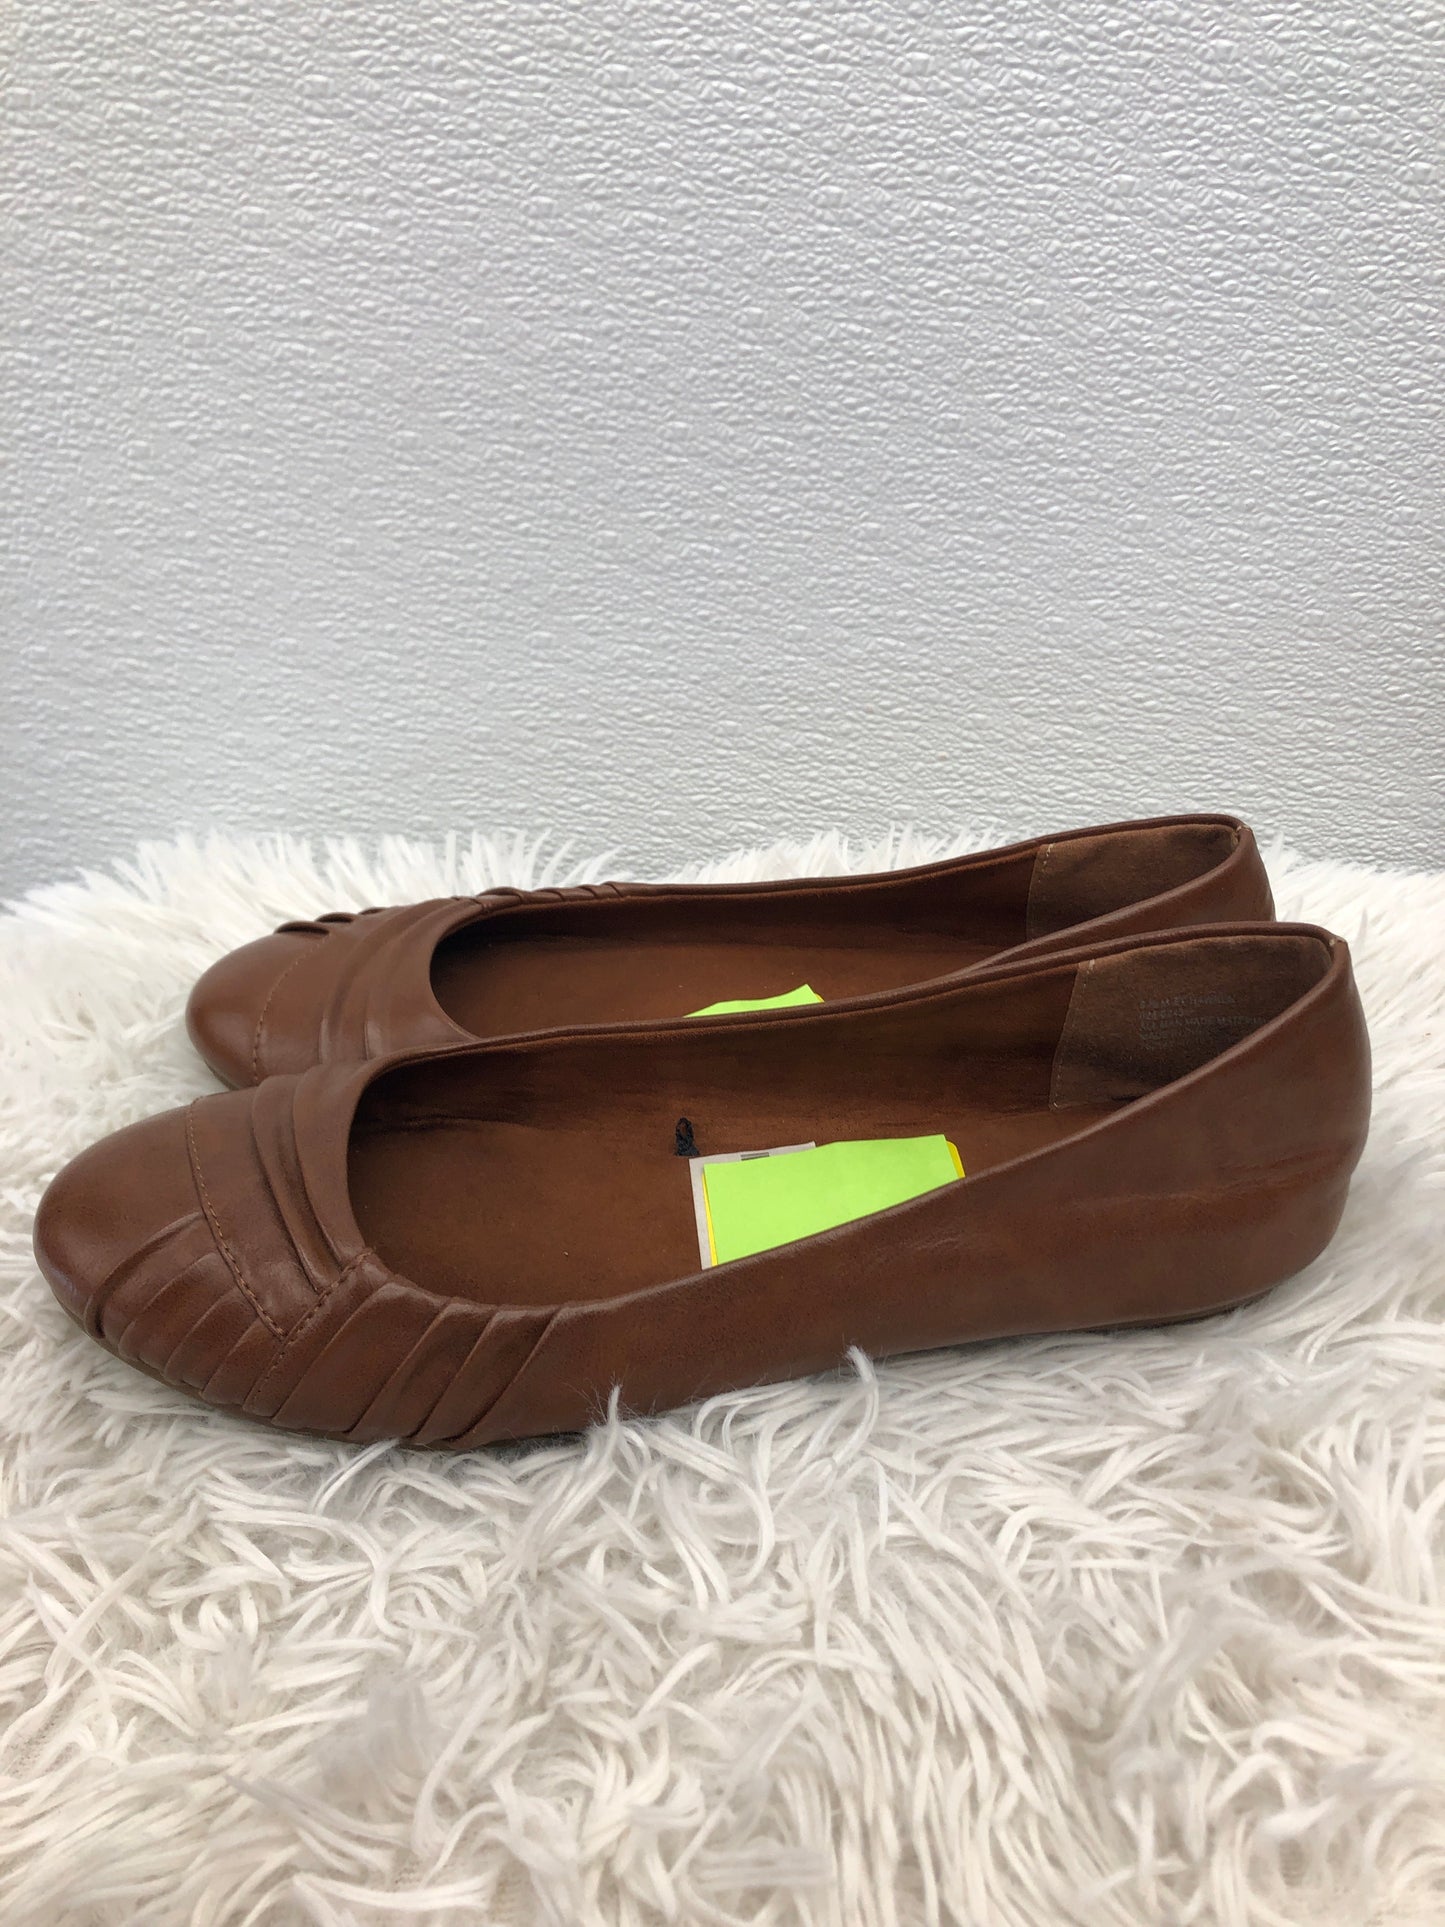 Shoes Flats Ballet By East 5th  Size: 8.5